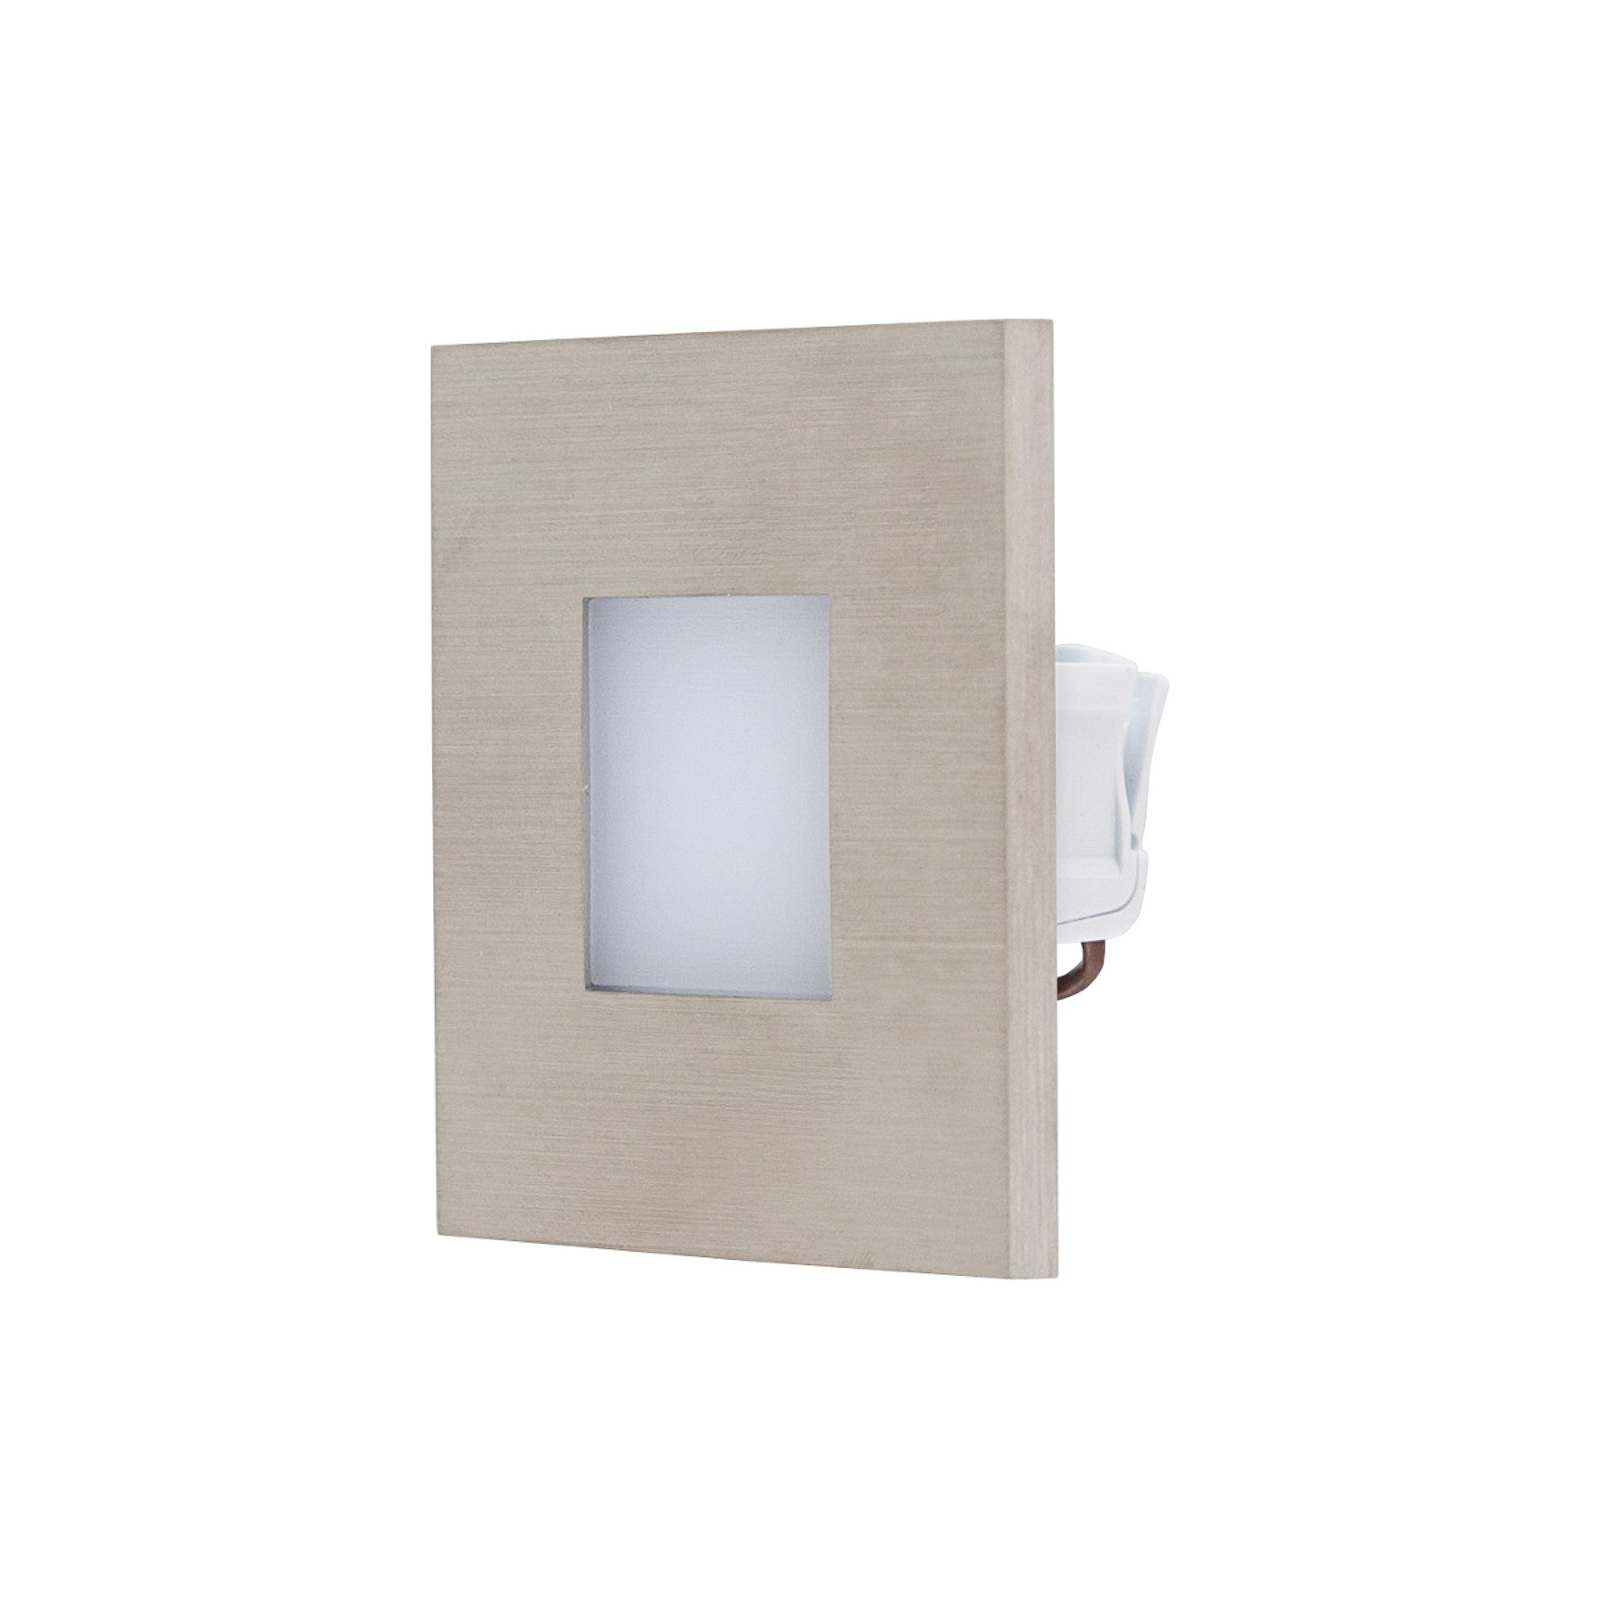 EVN LQ230 LED recessed wall direct stainless steel